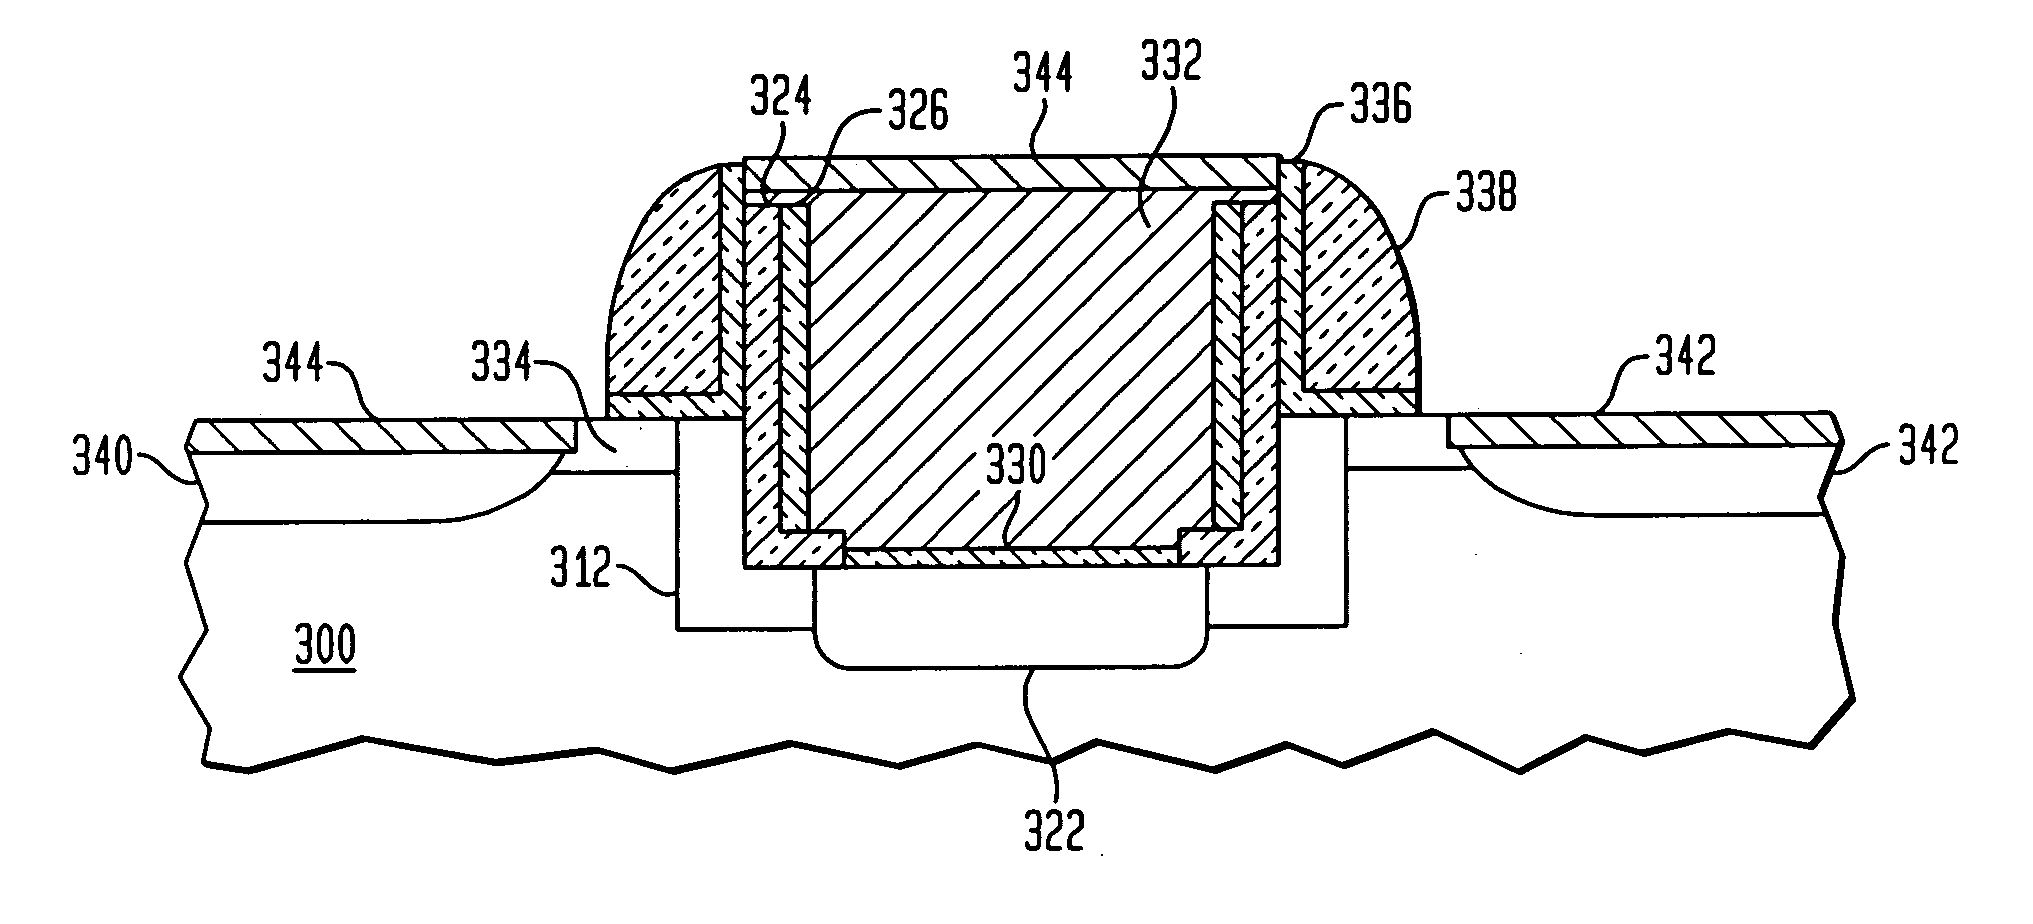 Encapsulated spacers in vertical pass gate dram and damascene logic gates